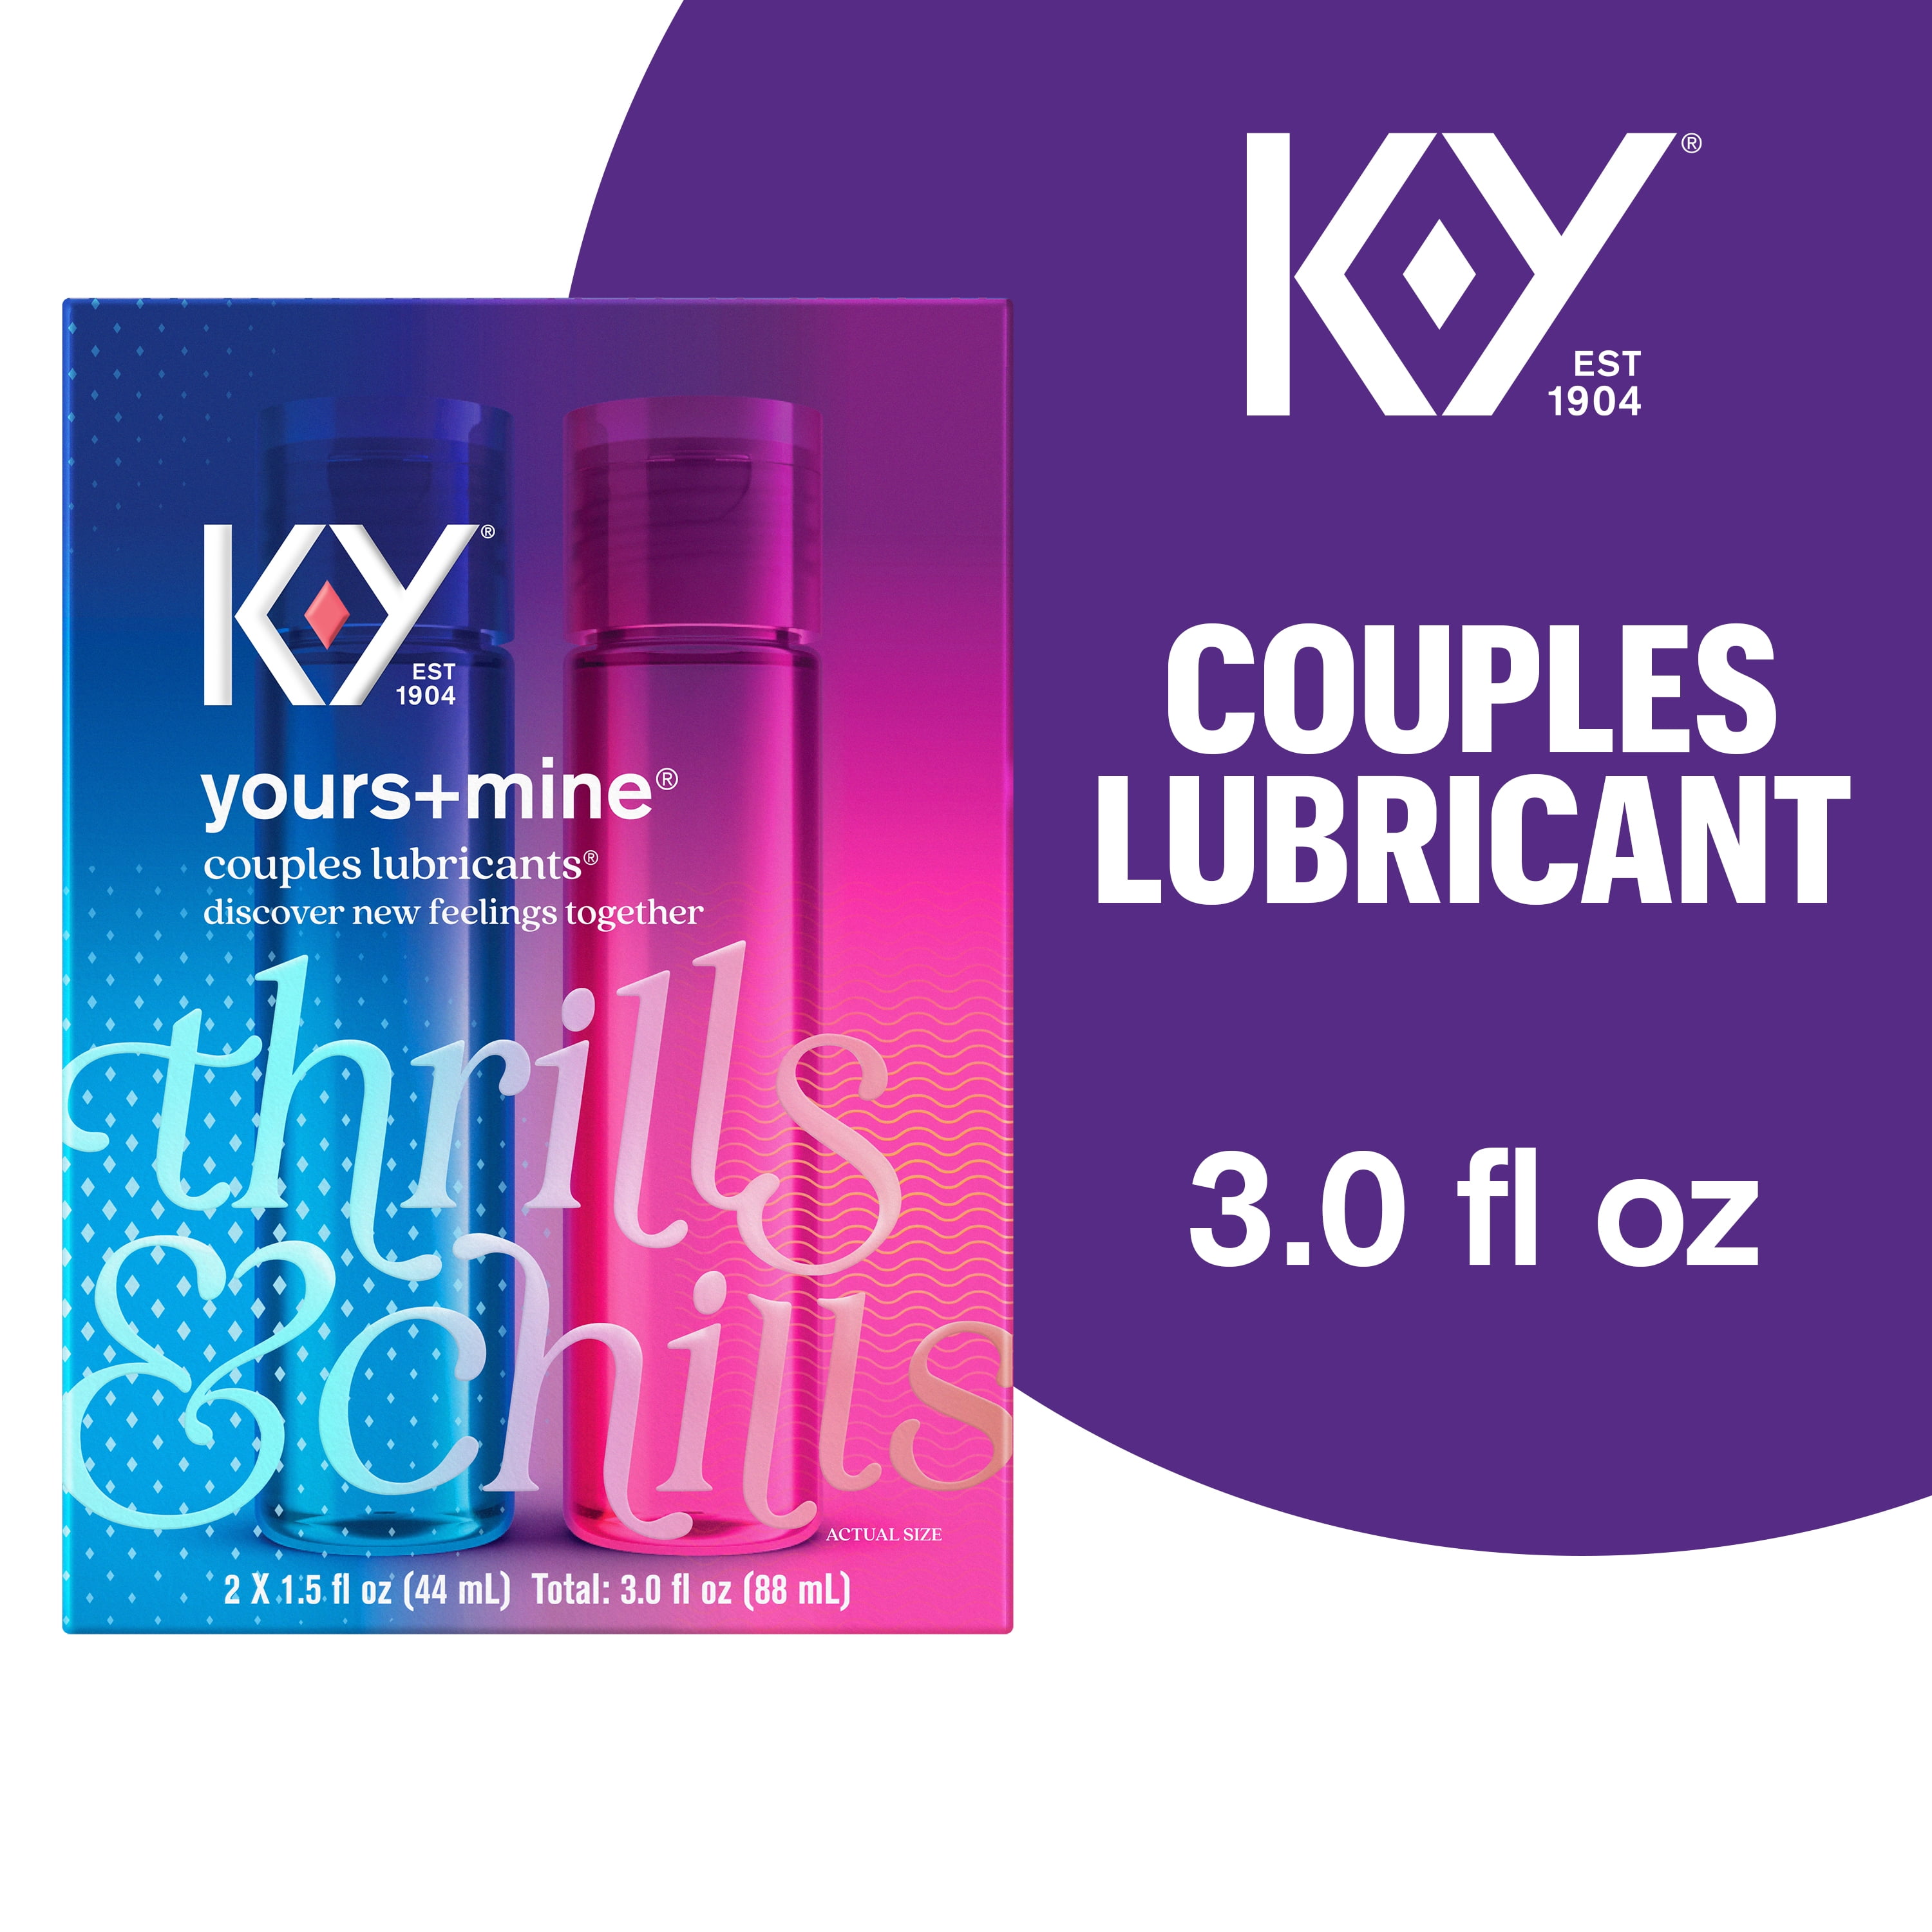 Pleasure　Yours　Stimulant,　Paraben　Lube　Thrills　Tingling　Warming　Mine　Personal　Free,　Women,　Adult　Friendly　oz　Men,　Arousal　Moisturizer,　Enhancer,　Toy　Couples,　K-Y　Vaginal　for　fl　Lubricant　Chills